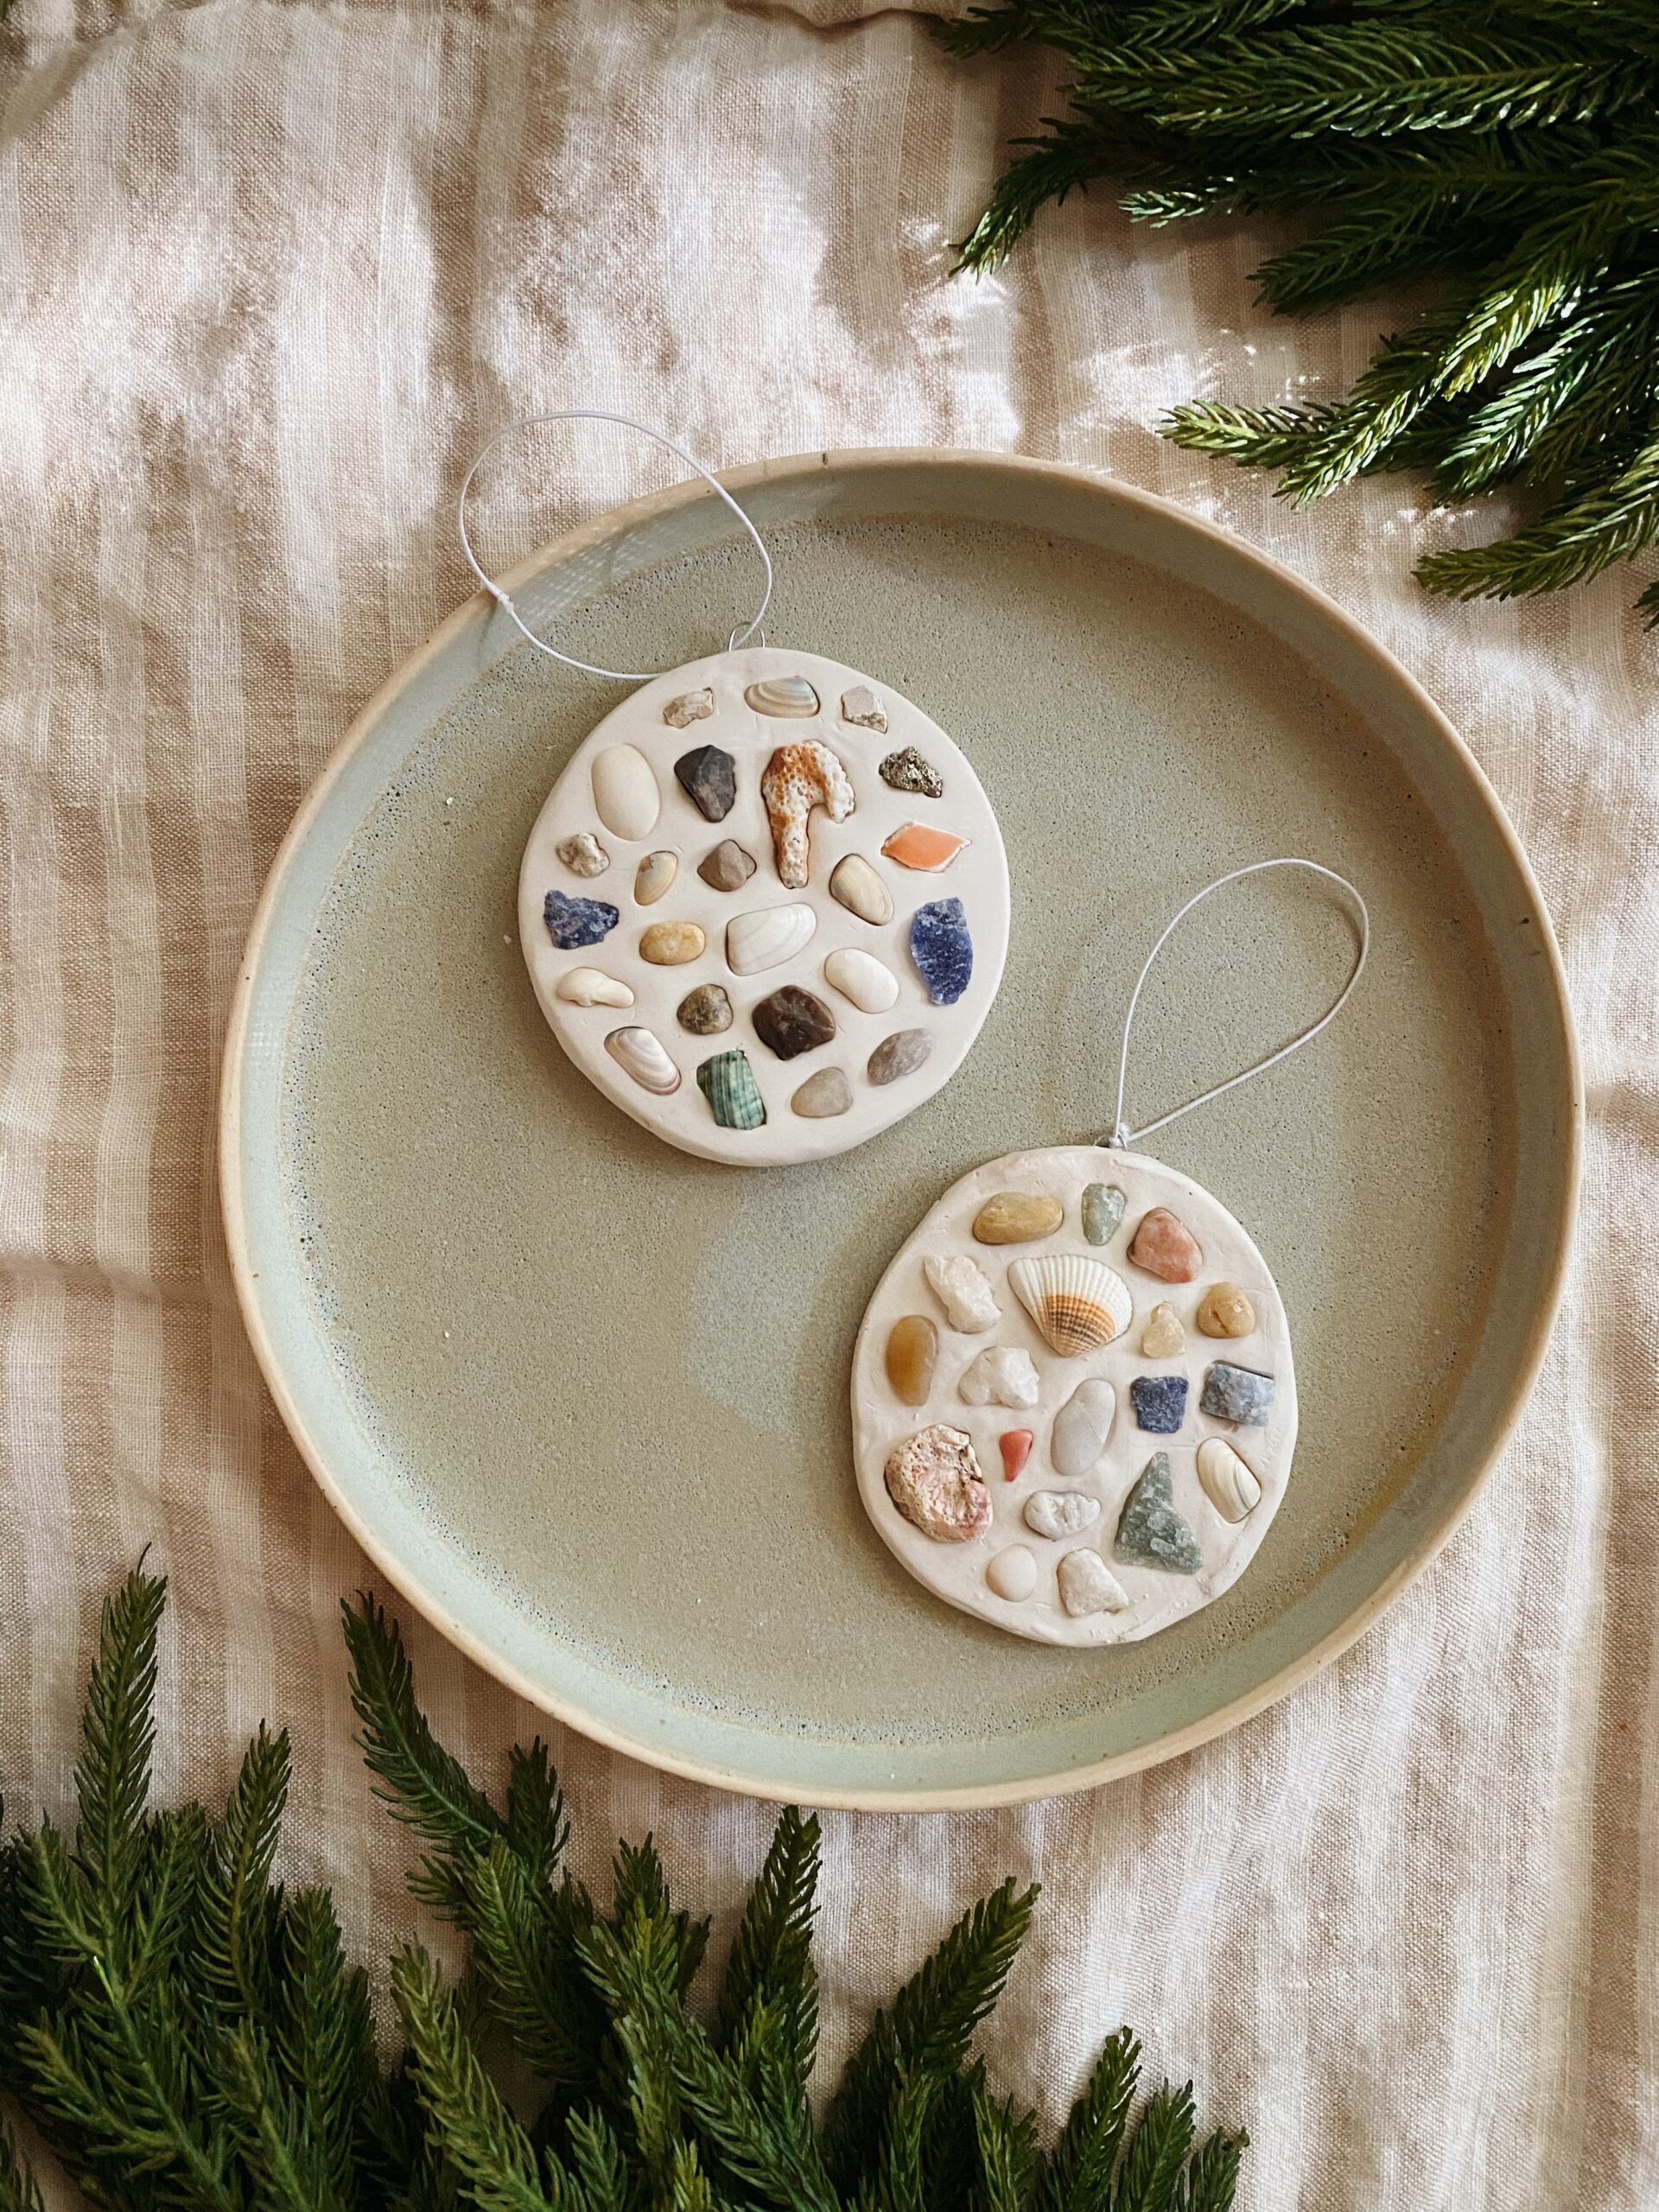 How to Make Easy and Beautiful DIY Clay Christmas Ornaments